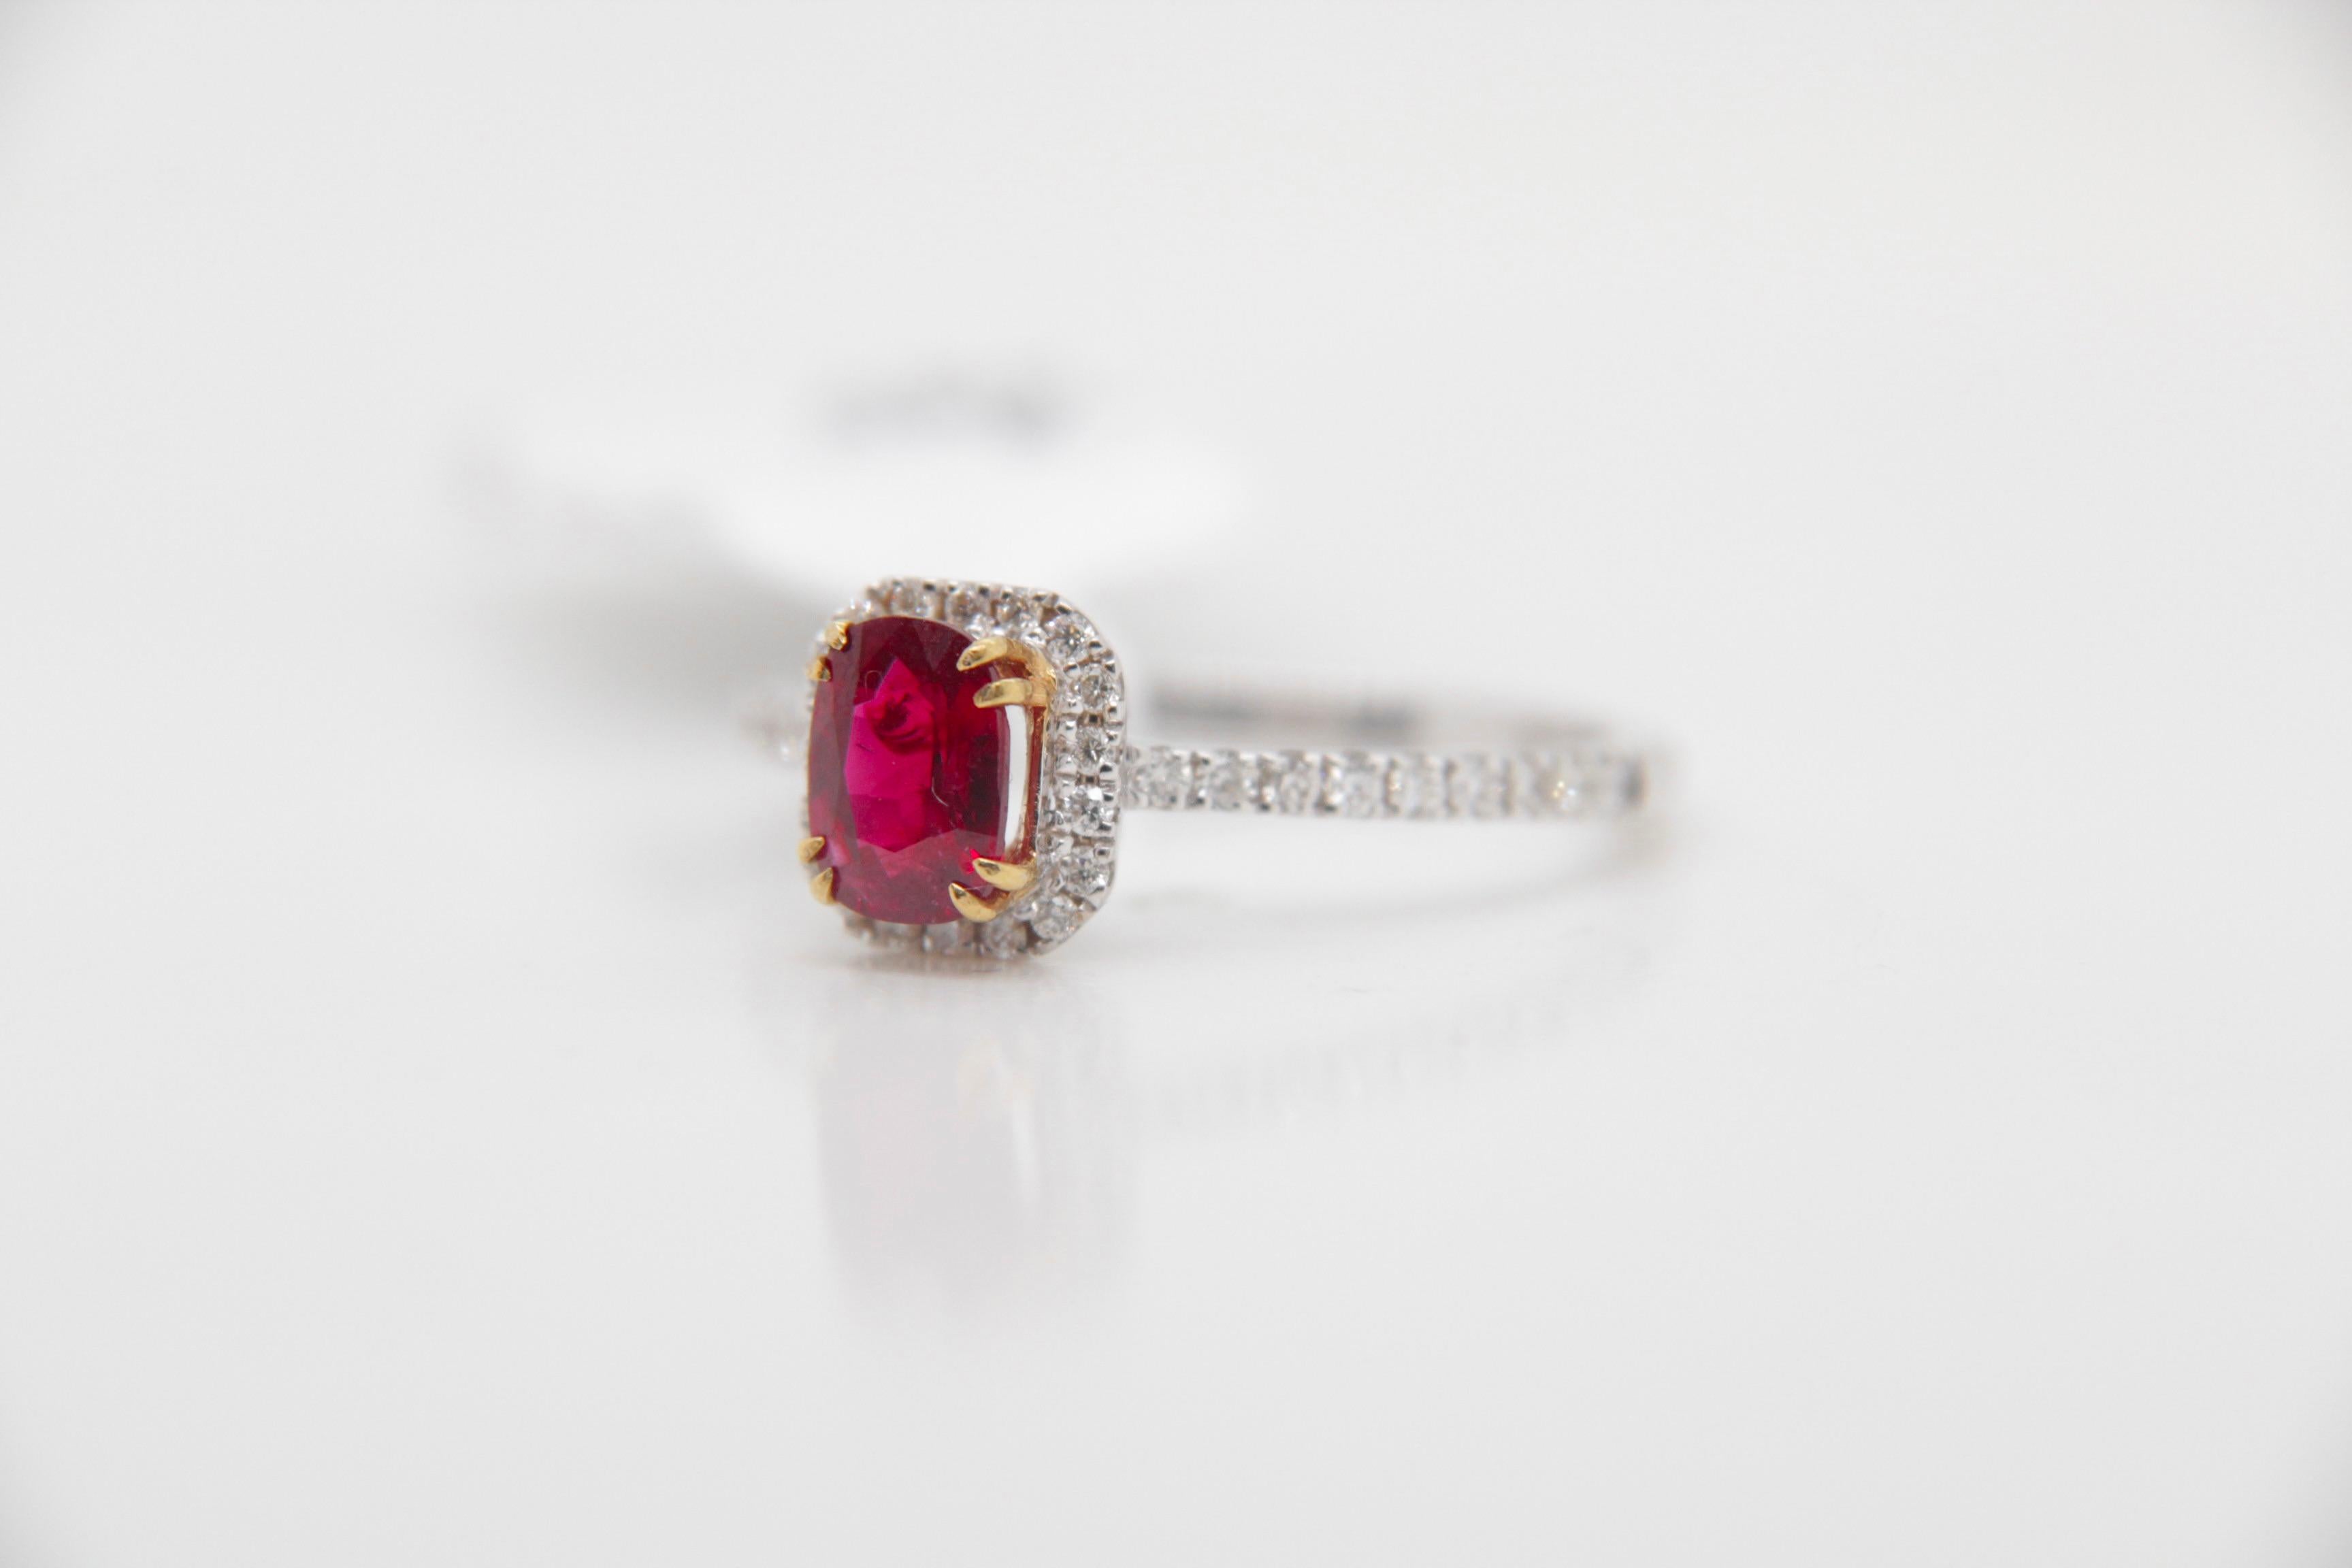 Introducing an exquisite creation from Rewa Jewelry, this ruby and diamond ring effortlessly combines contemporary style with timeless sophistication—a piece designed to be both a statement and a symbol.

Crafted with inspiration drawn from